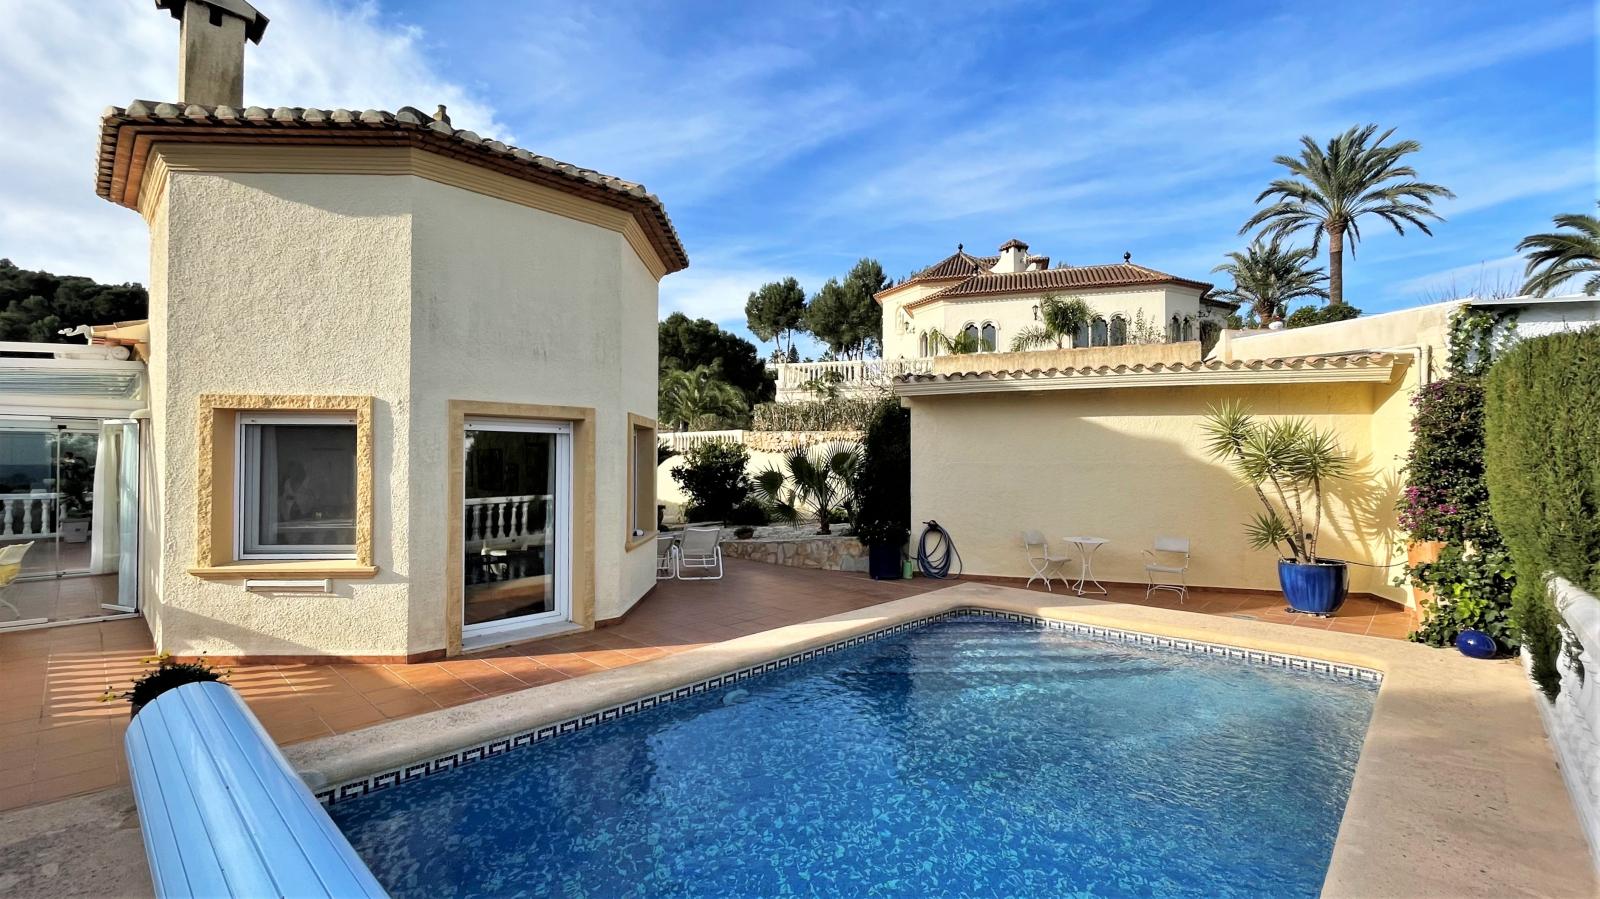 Beautiful villa with sea view in a privileged location, with underfloor heating, pool, carport, winter garden and much more!